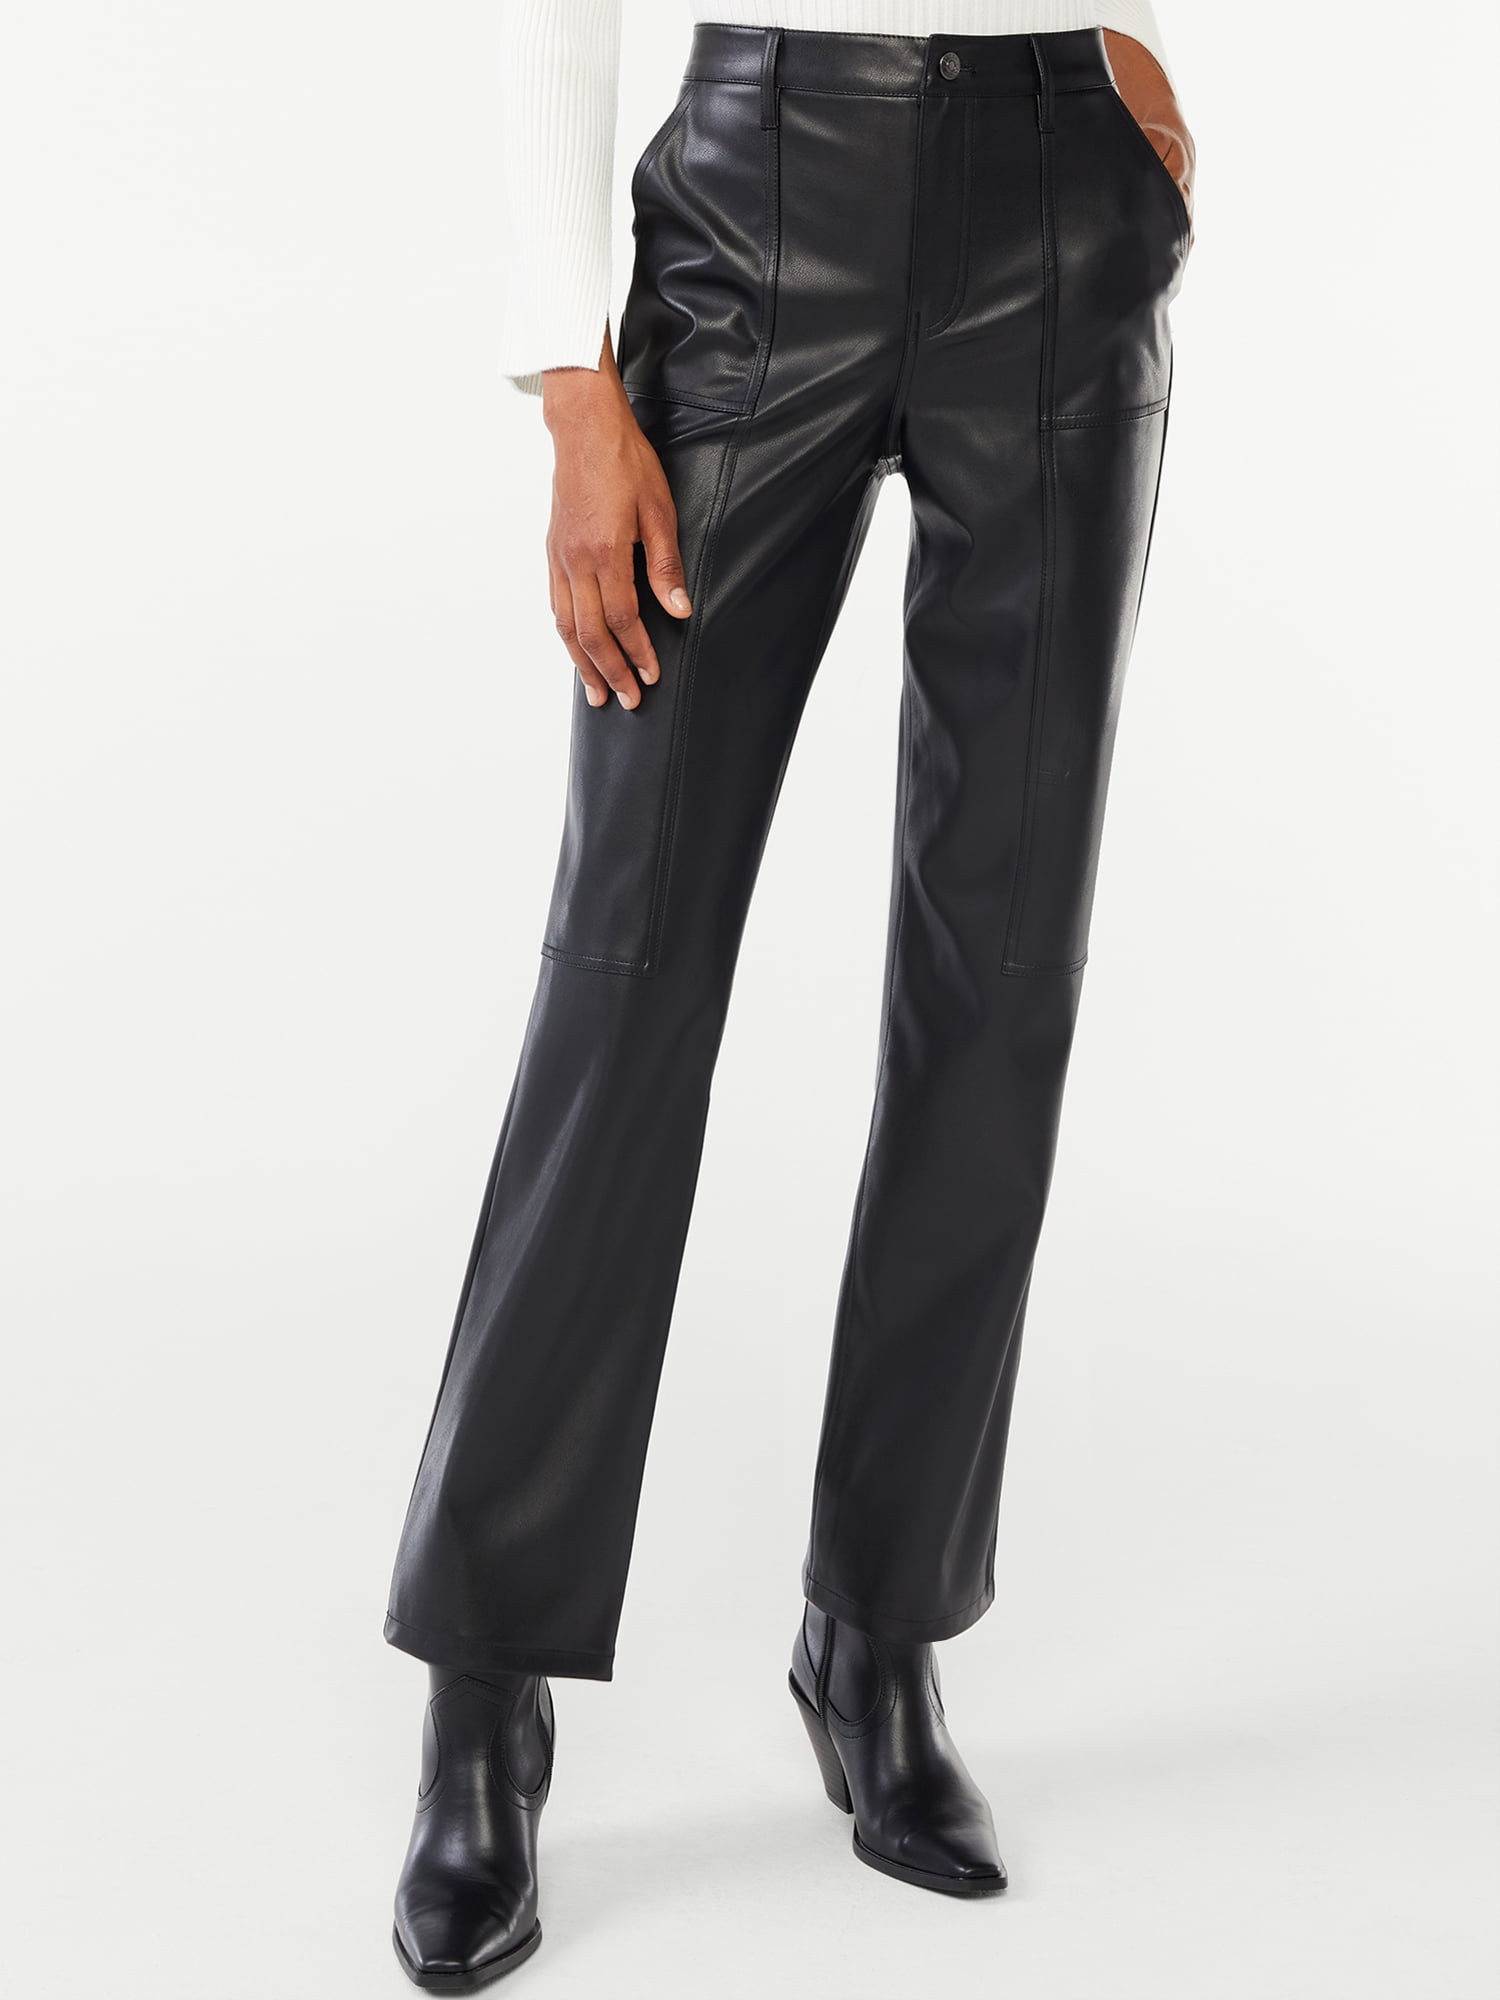 Faux leather trousers for women, Faux leather clothes